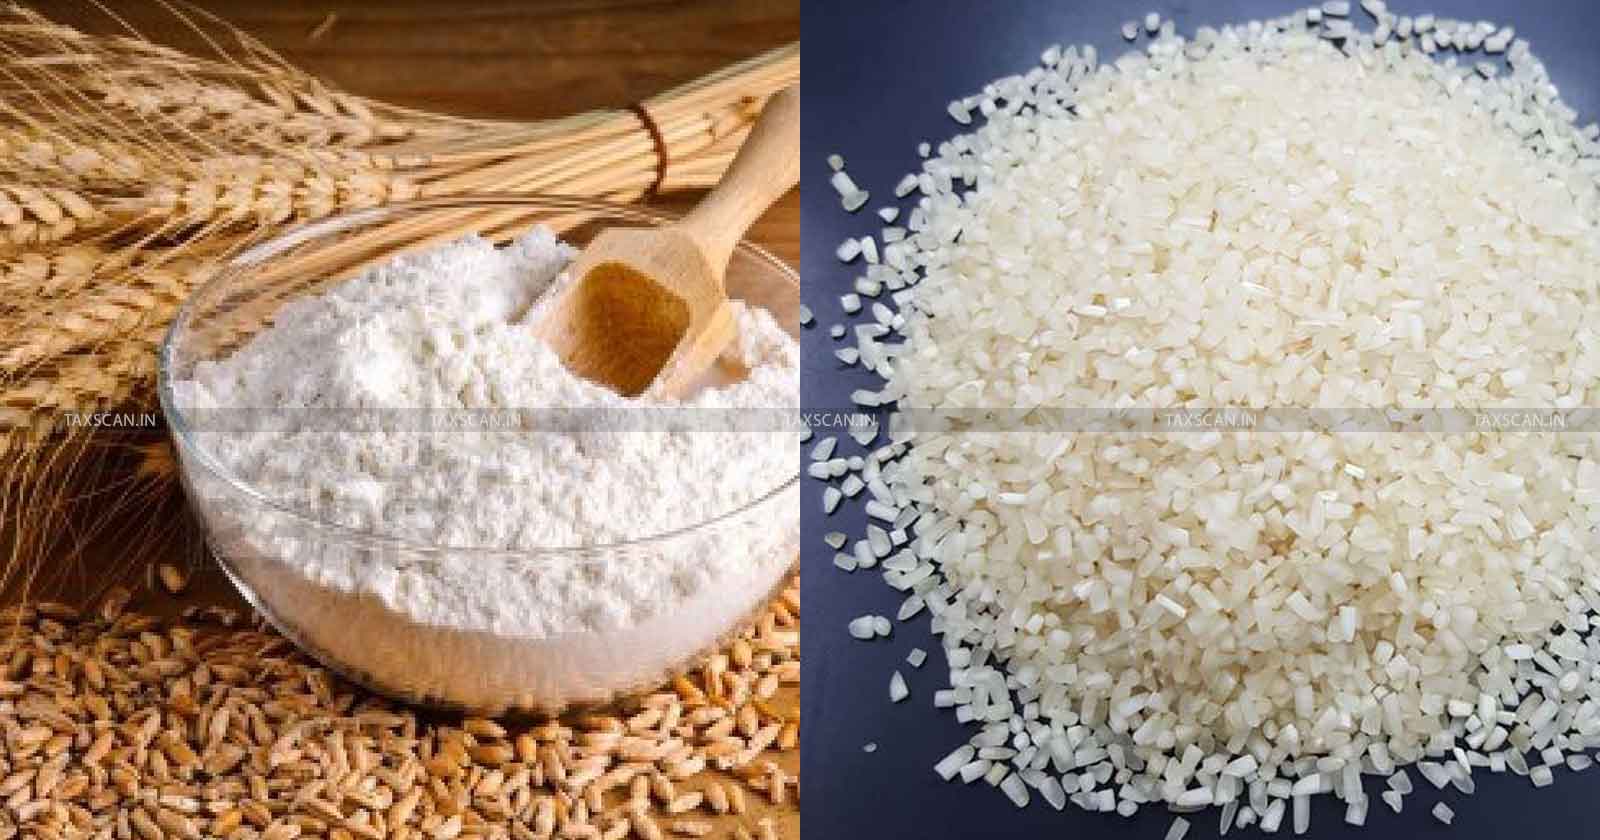 Central Govt invites application from Exporters - Central Govt invites - Central Govt - Quota to Export Wheat - Export Wheat - Wheat - Wheat Flour - Broken Rice - Taxscan